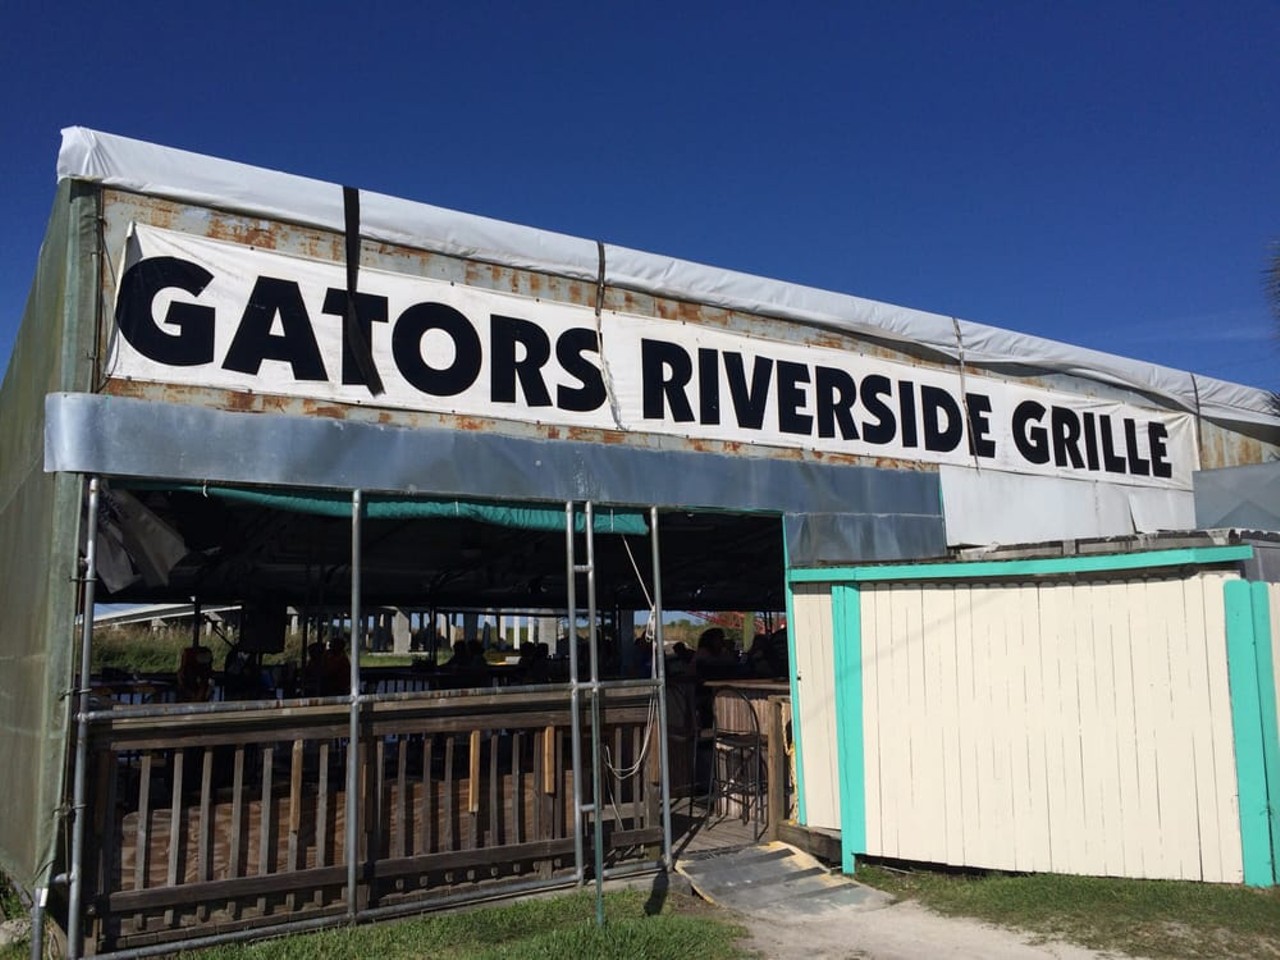 Gators Riverside Grille
4255 Peninsula Point, Sanford
Gator's Riverside Grill, located in Sanford, is nestled along the St. Johns River and offers cheap drinks and tons of good old-fashioned Southern fried seafood.